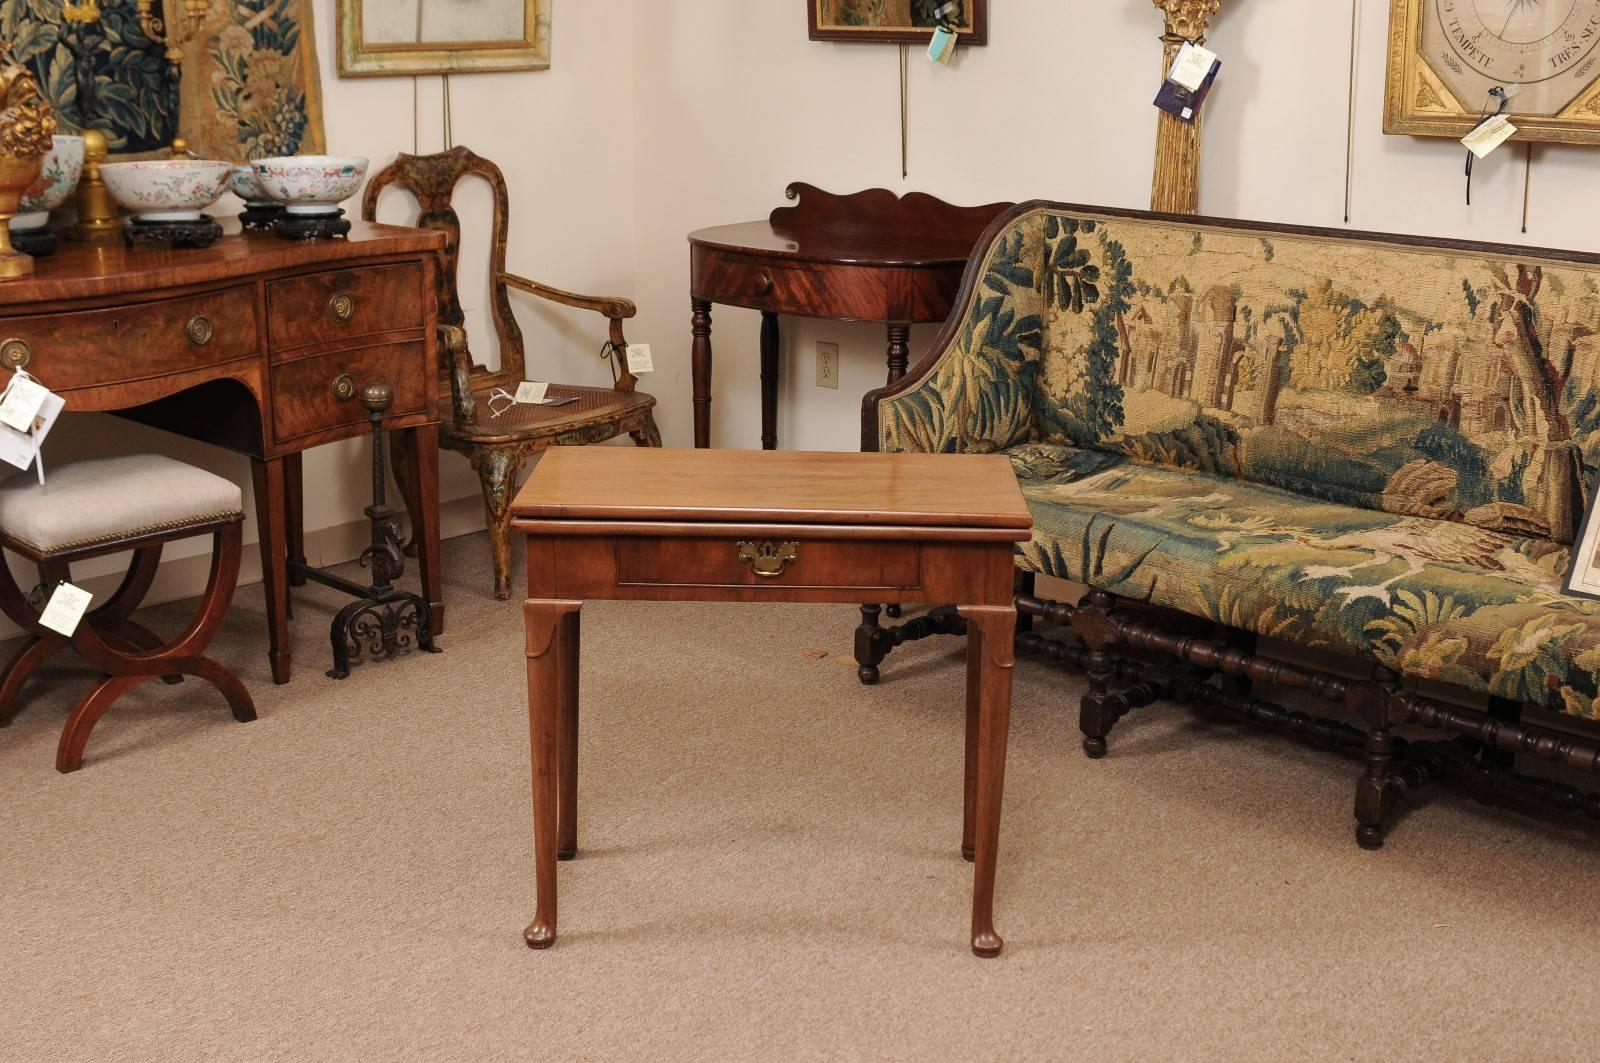 Mid-18th century English flip-top game table in mahogany with drawer and gate leg.